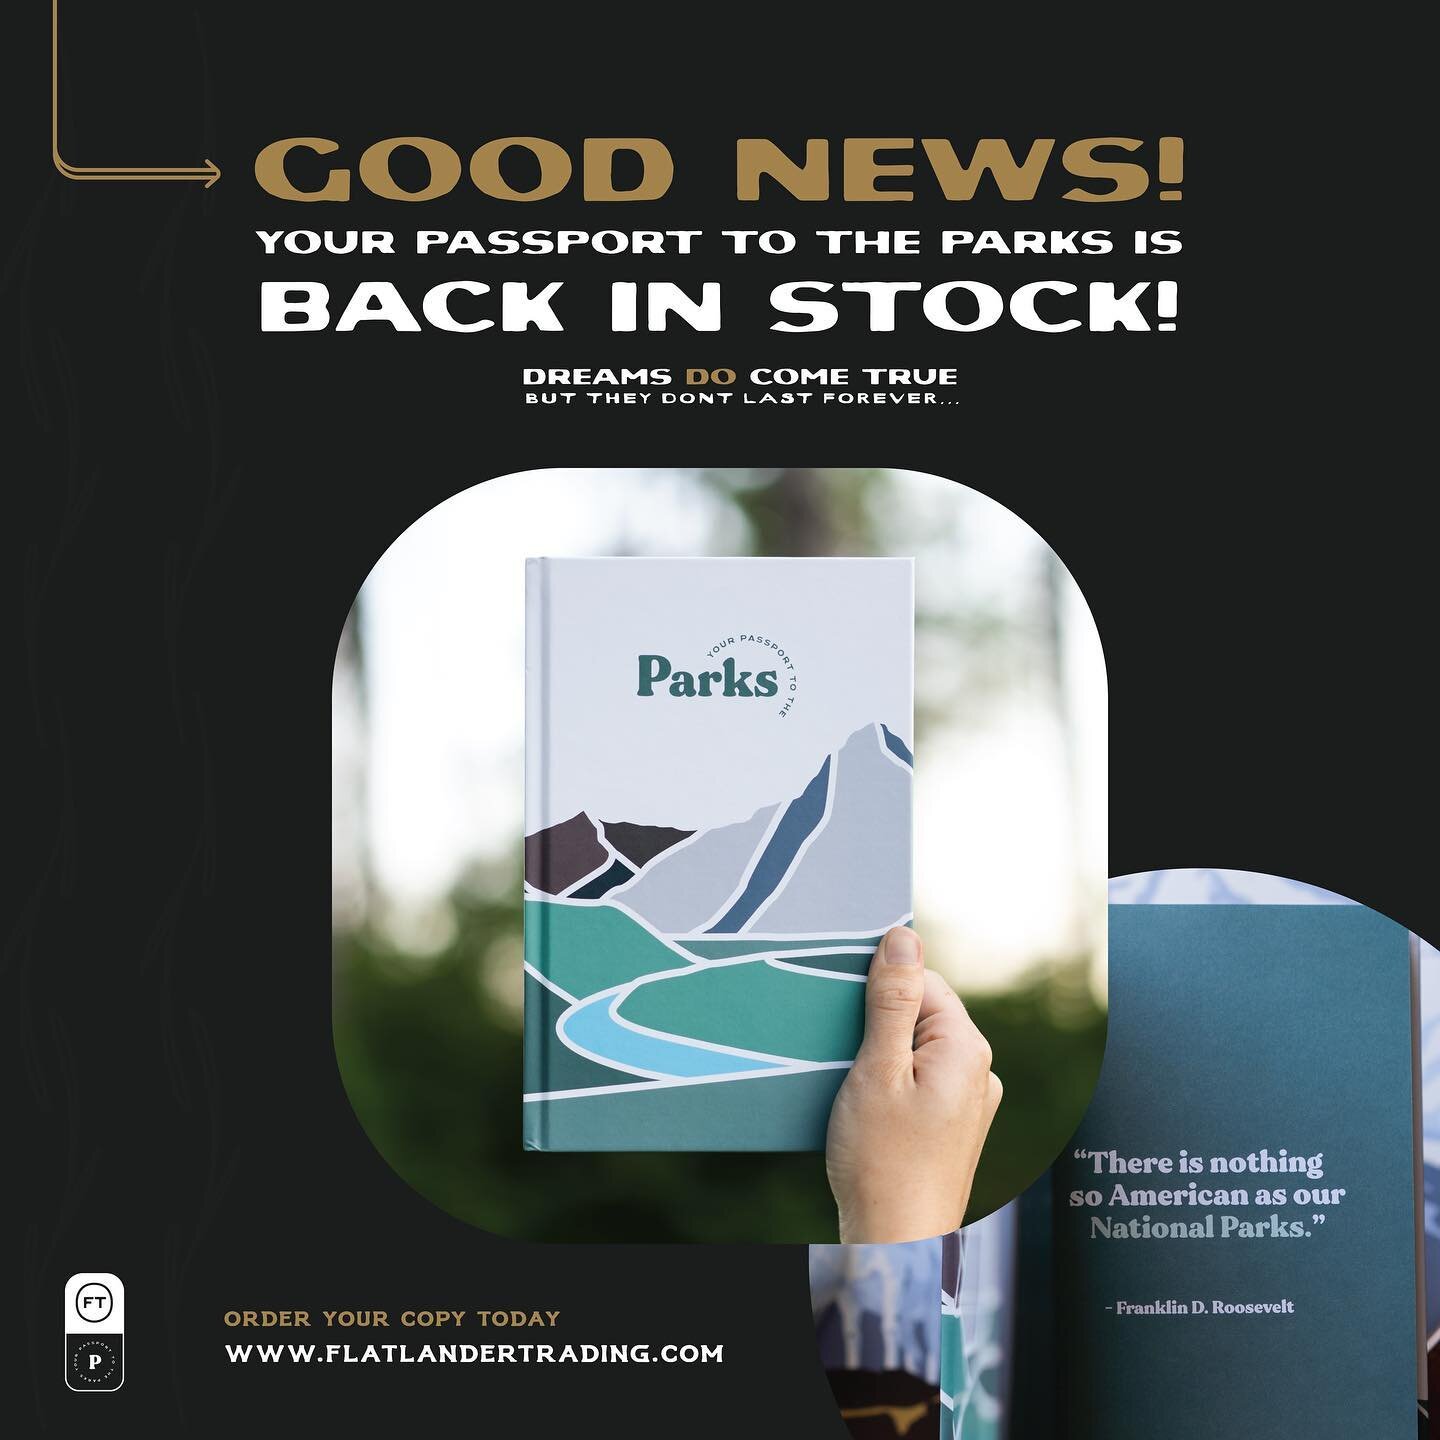 You heard us right&hellip;Your Passport to the Parks is back in stock. Dreams really do come true!

Visit our website to grab your copy today!!

#hiking #nature #mountains #adventure #travel #naturephotography #hikingadventures #landscape #outdoors #